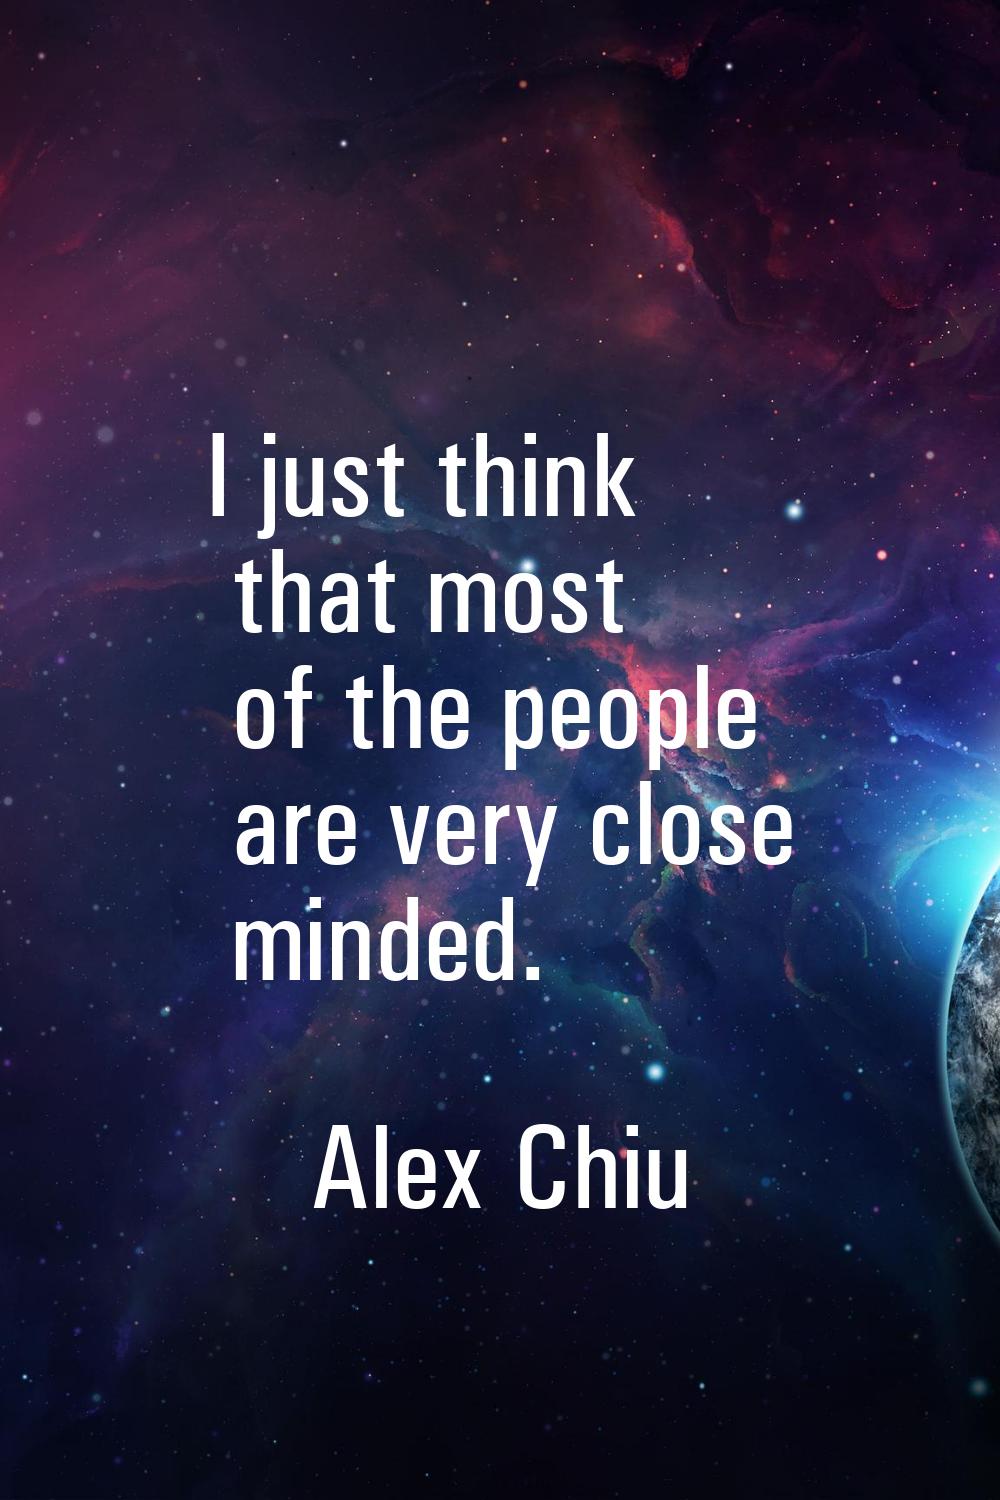 I just think that most of the people are very close minded.